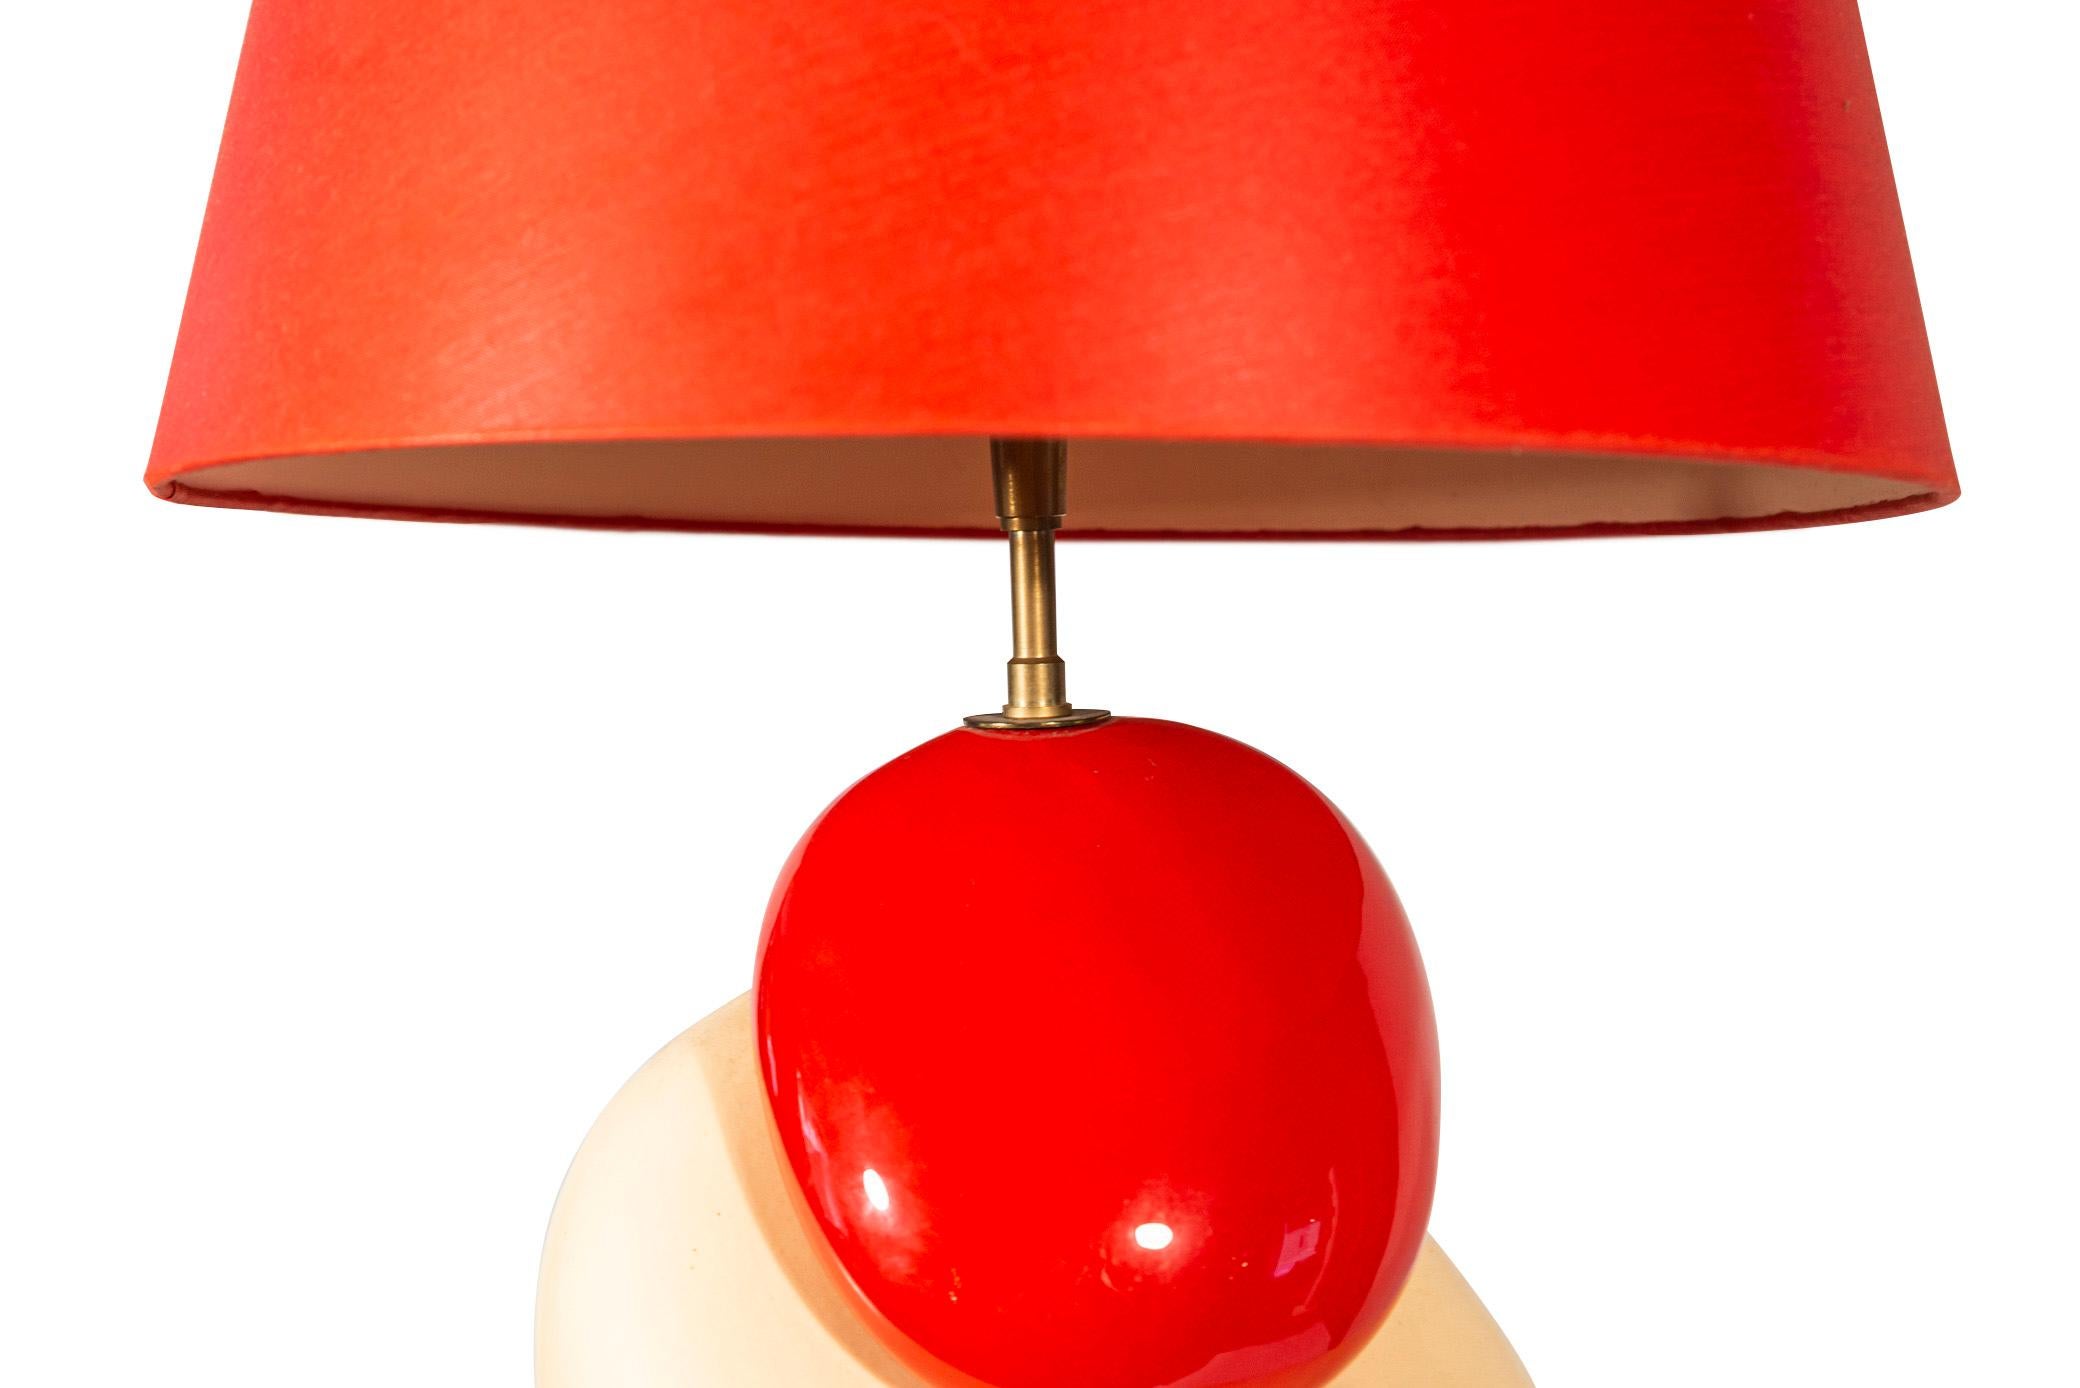 François Chatain, Table lamp,
Enameled ceramic, 
Decorated with red and white pebbles superimposed,
With lampshade,
Signed,
circa 1970, France.

Measures: Height 91 cm, depth 33 cm, width 27 cm.